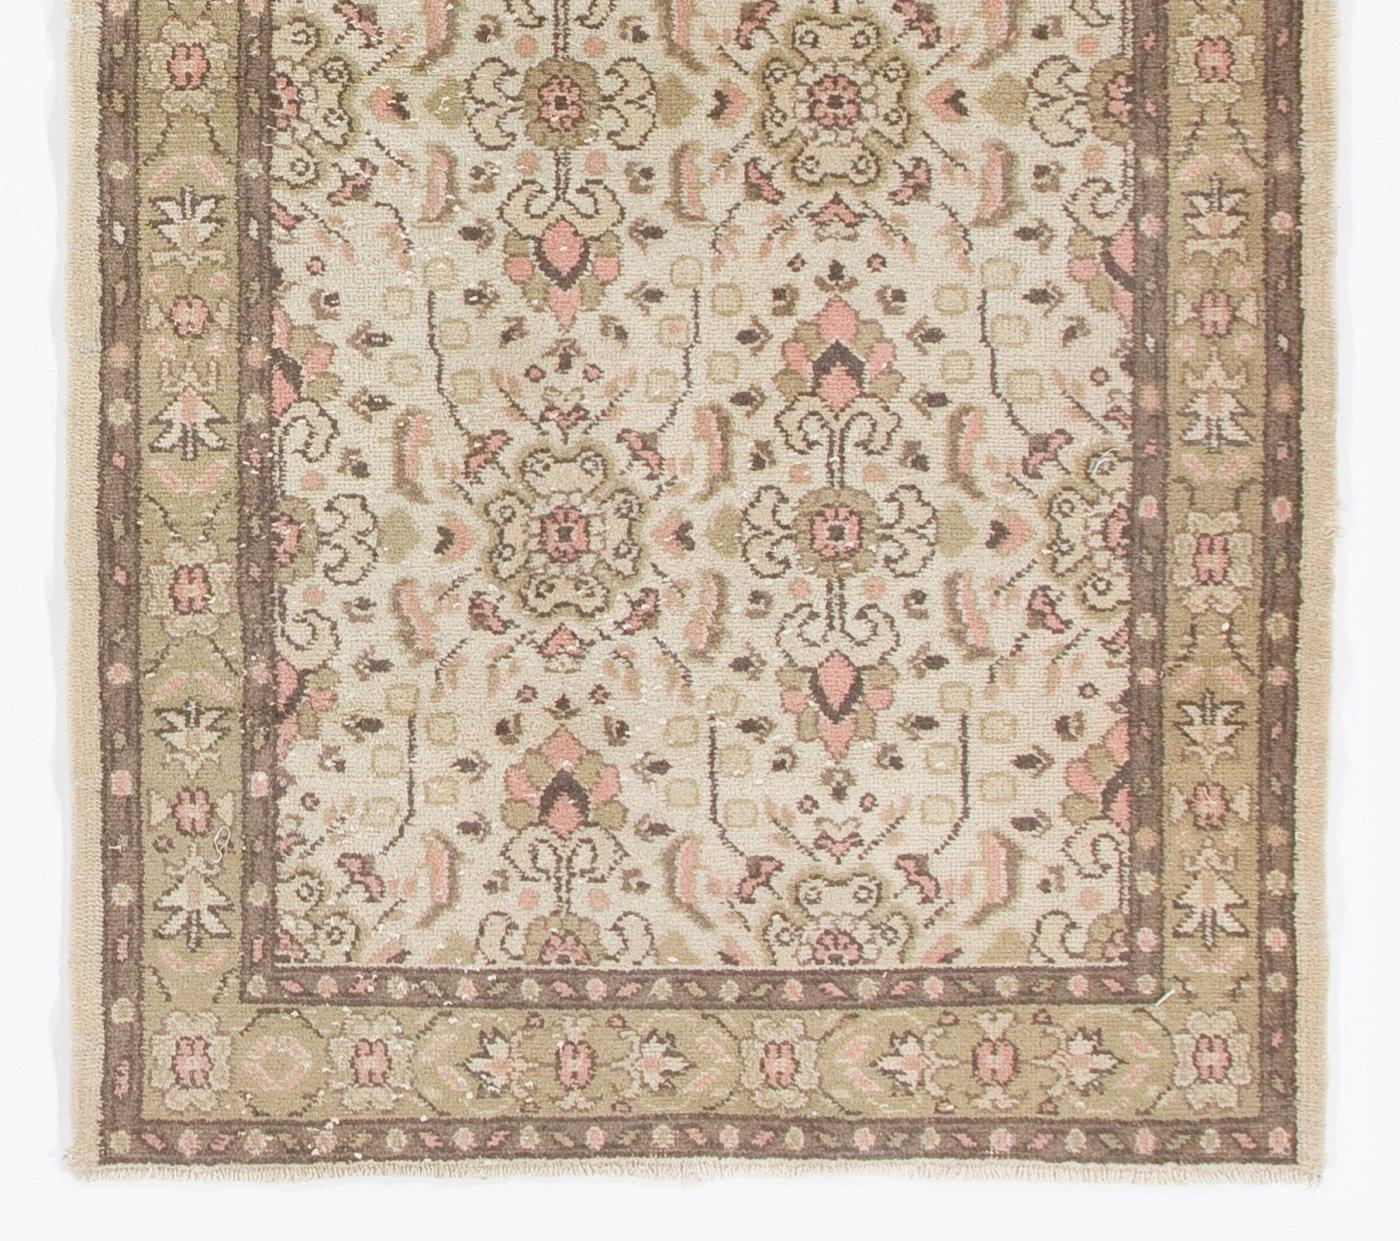 Oushak 3.7x6.8 Ft Vintage Anatolian Wool Rug in Beige, Faded Green, Soft Pink and Brown For Sale